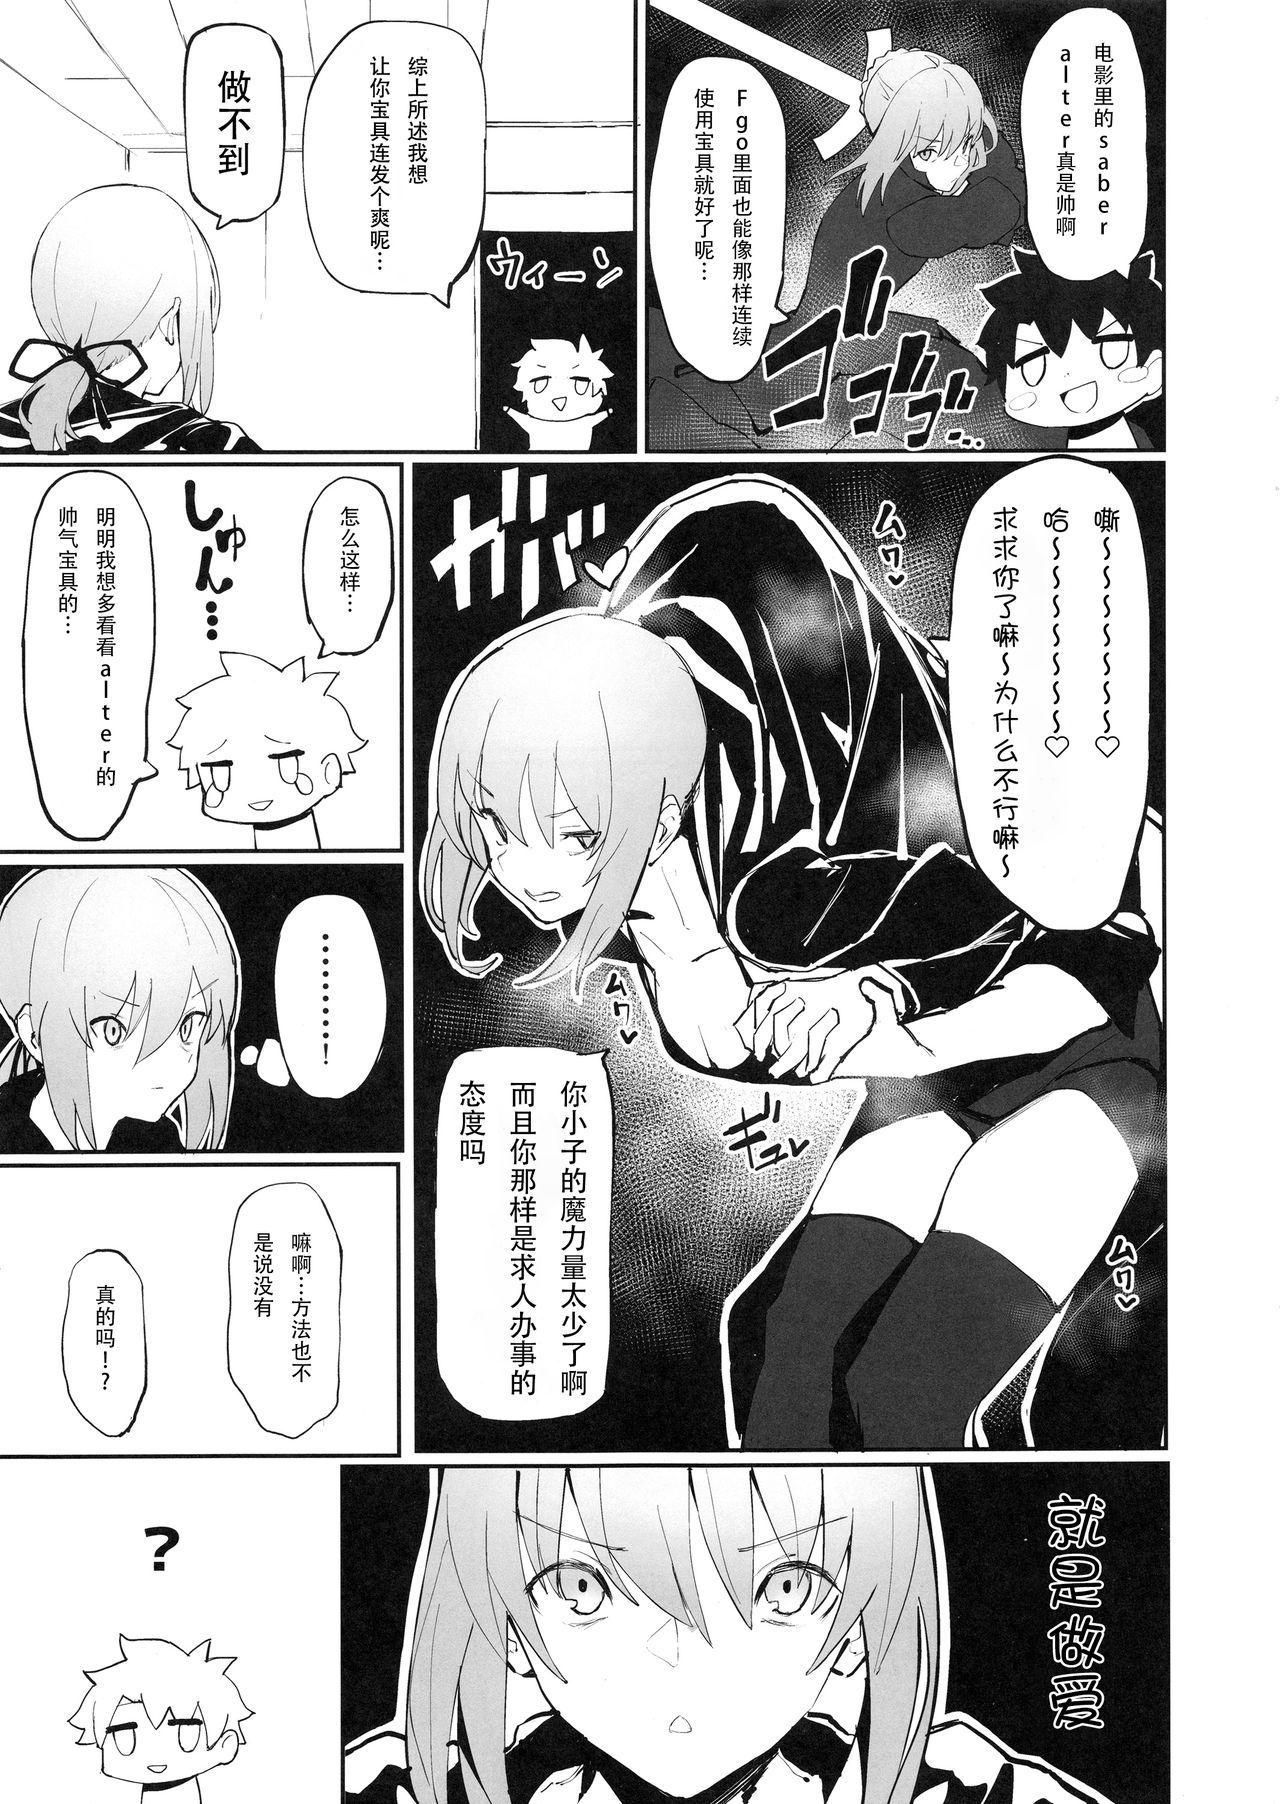 Machine Saber Alter to Maryoku Kyoukyuu | 和saber alter的魔力供给♡ - Fate grand order Glam - Page 2